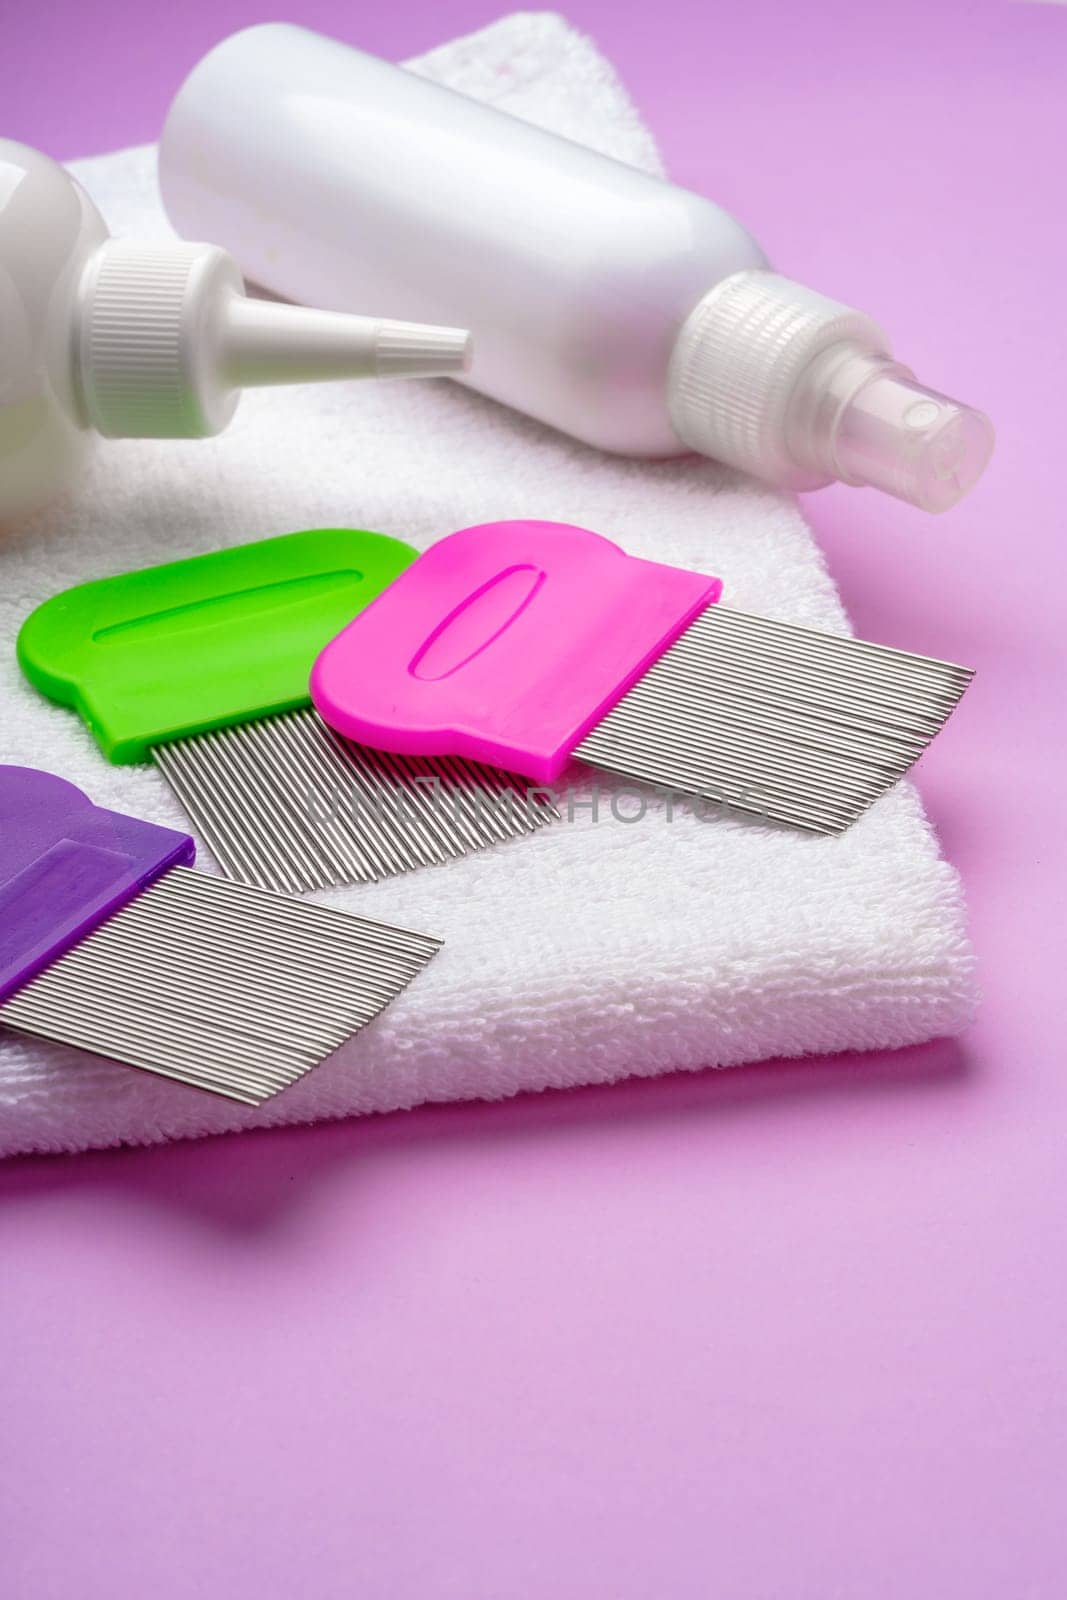 Anti lice combs and towel on pink background studio shot